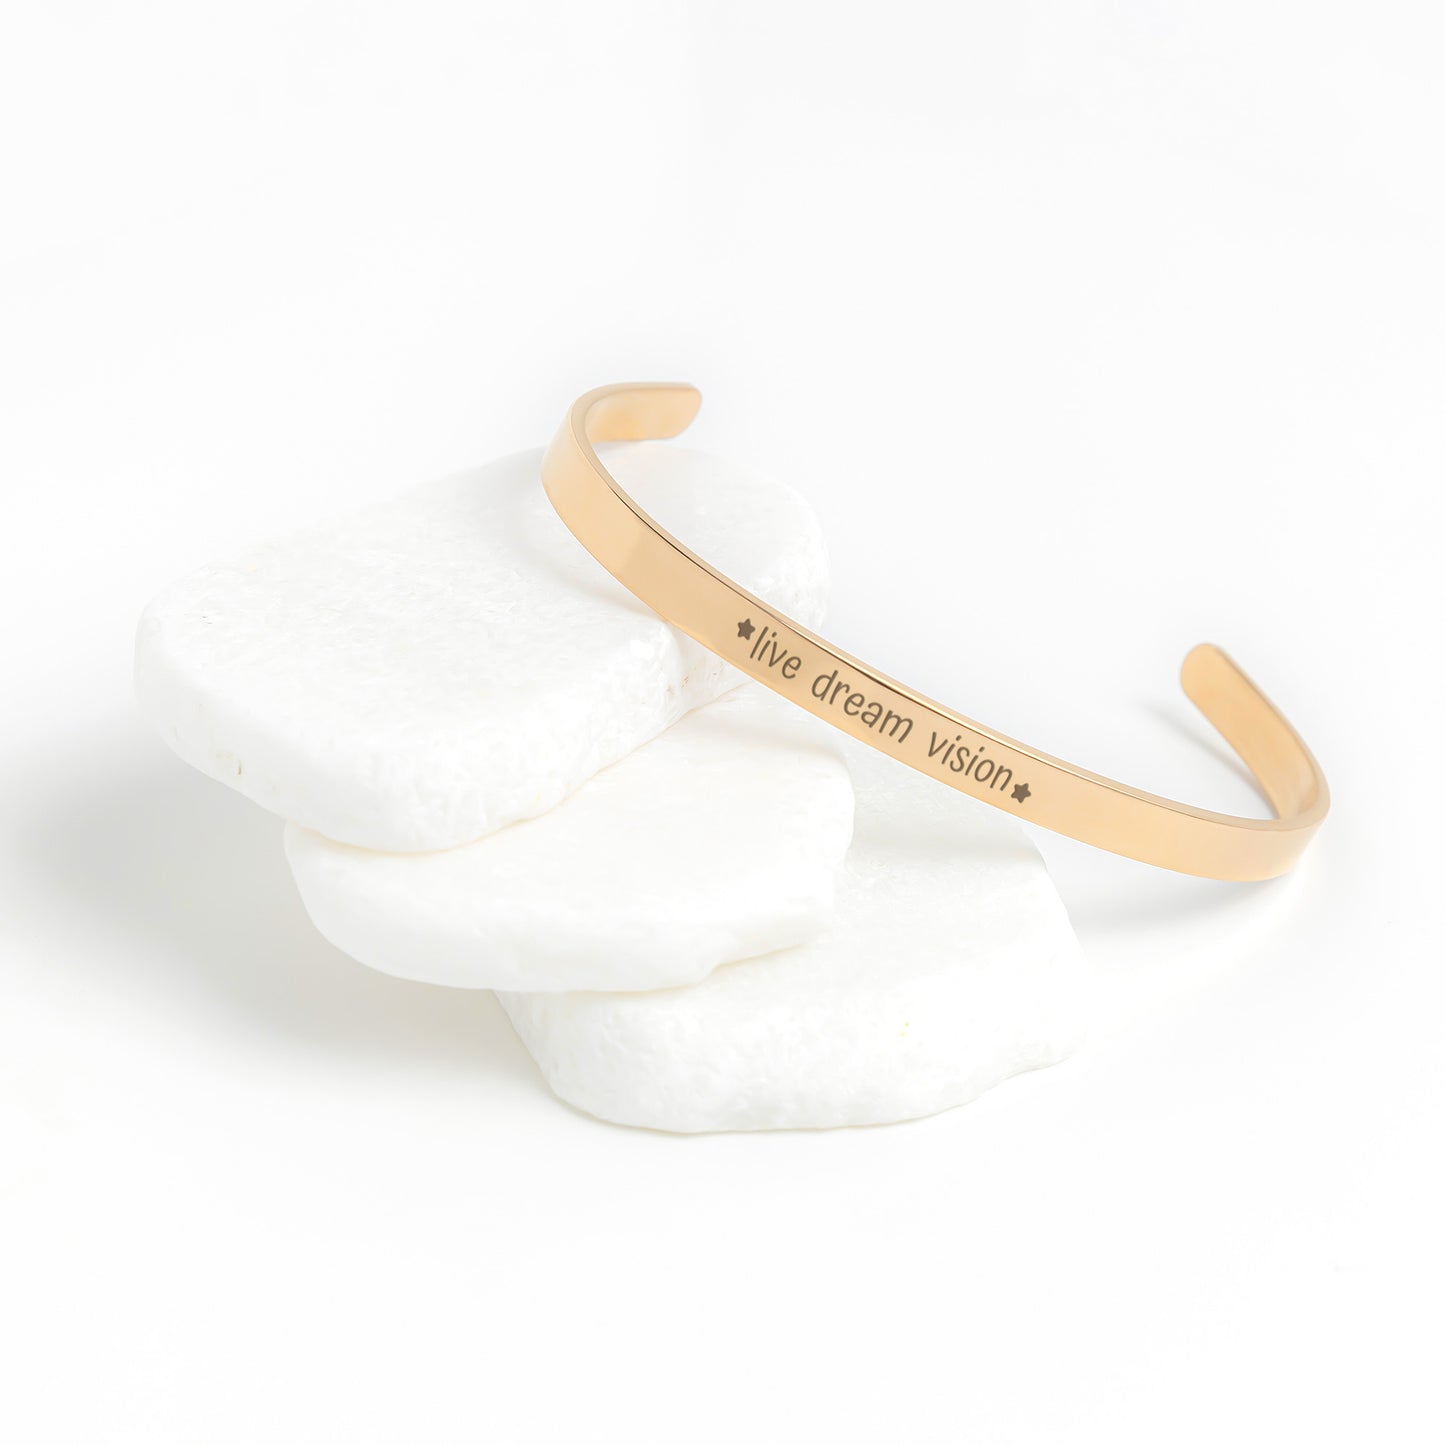 Live Dream Vision Cuff Bracelet, Gold, Rose Gold and Silver